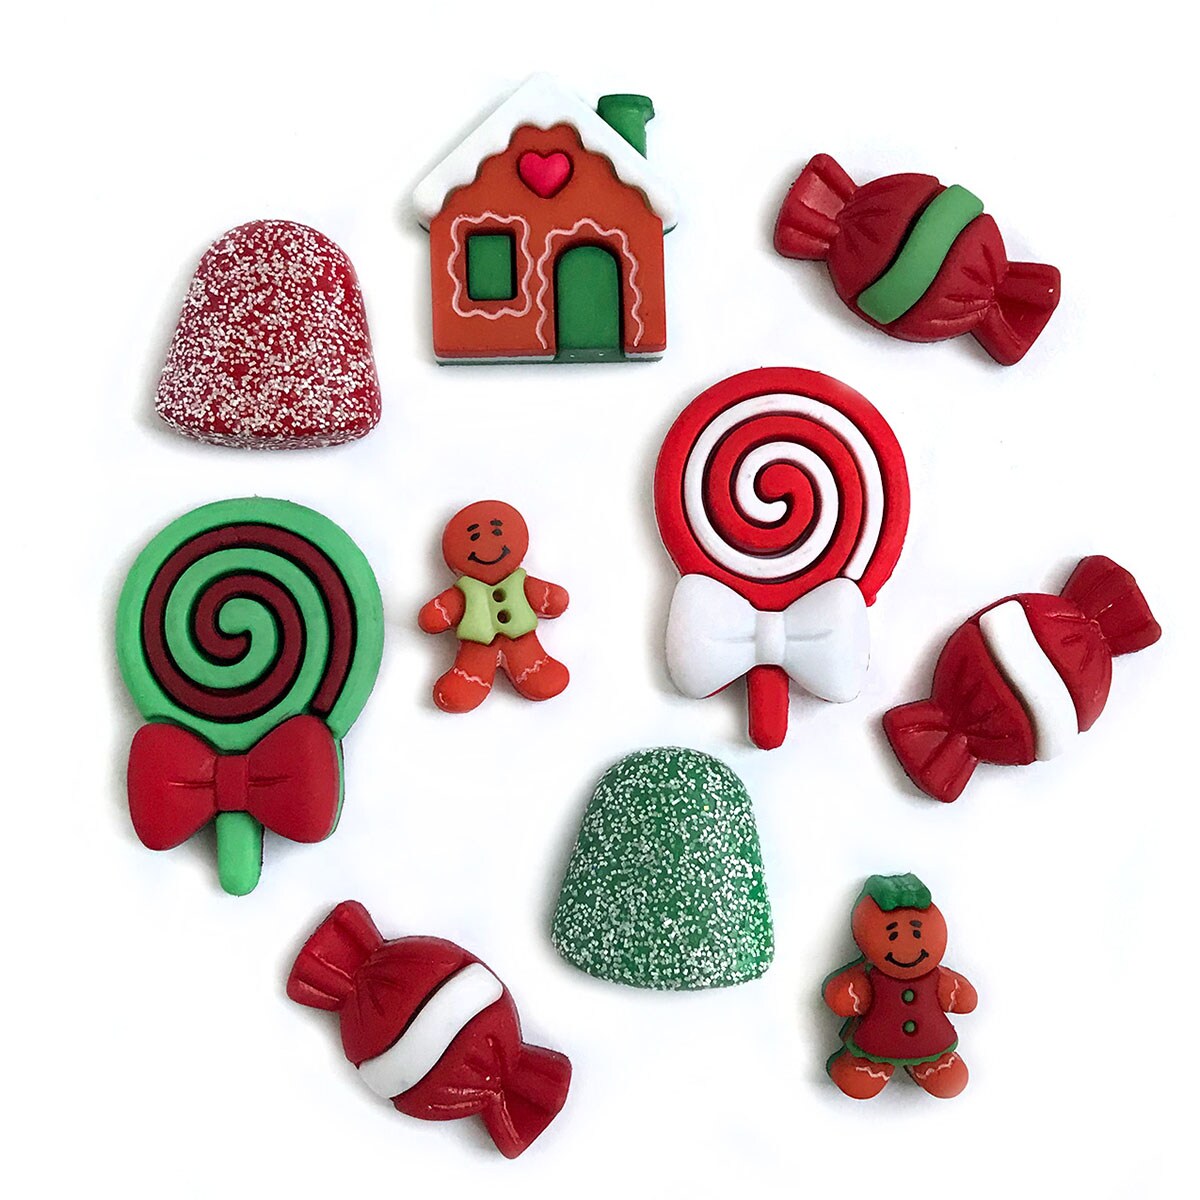 Buttons Galore 50+ Assorted Christmas Buttons for Sewing &#x26; Crafts - Set of 6 Button Packs - Candy Canes, Santa, Lights &#x26; More